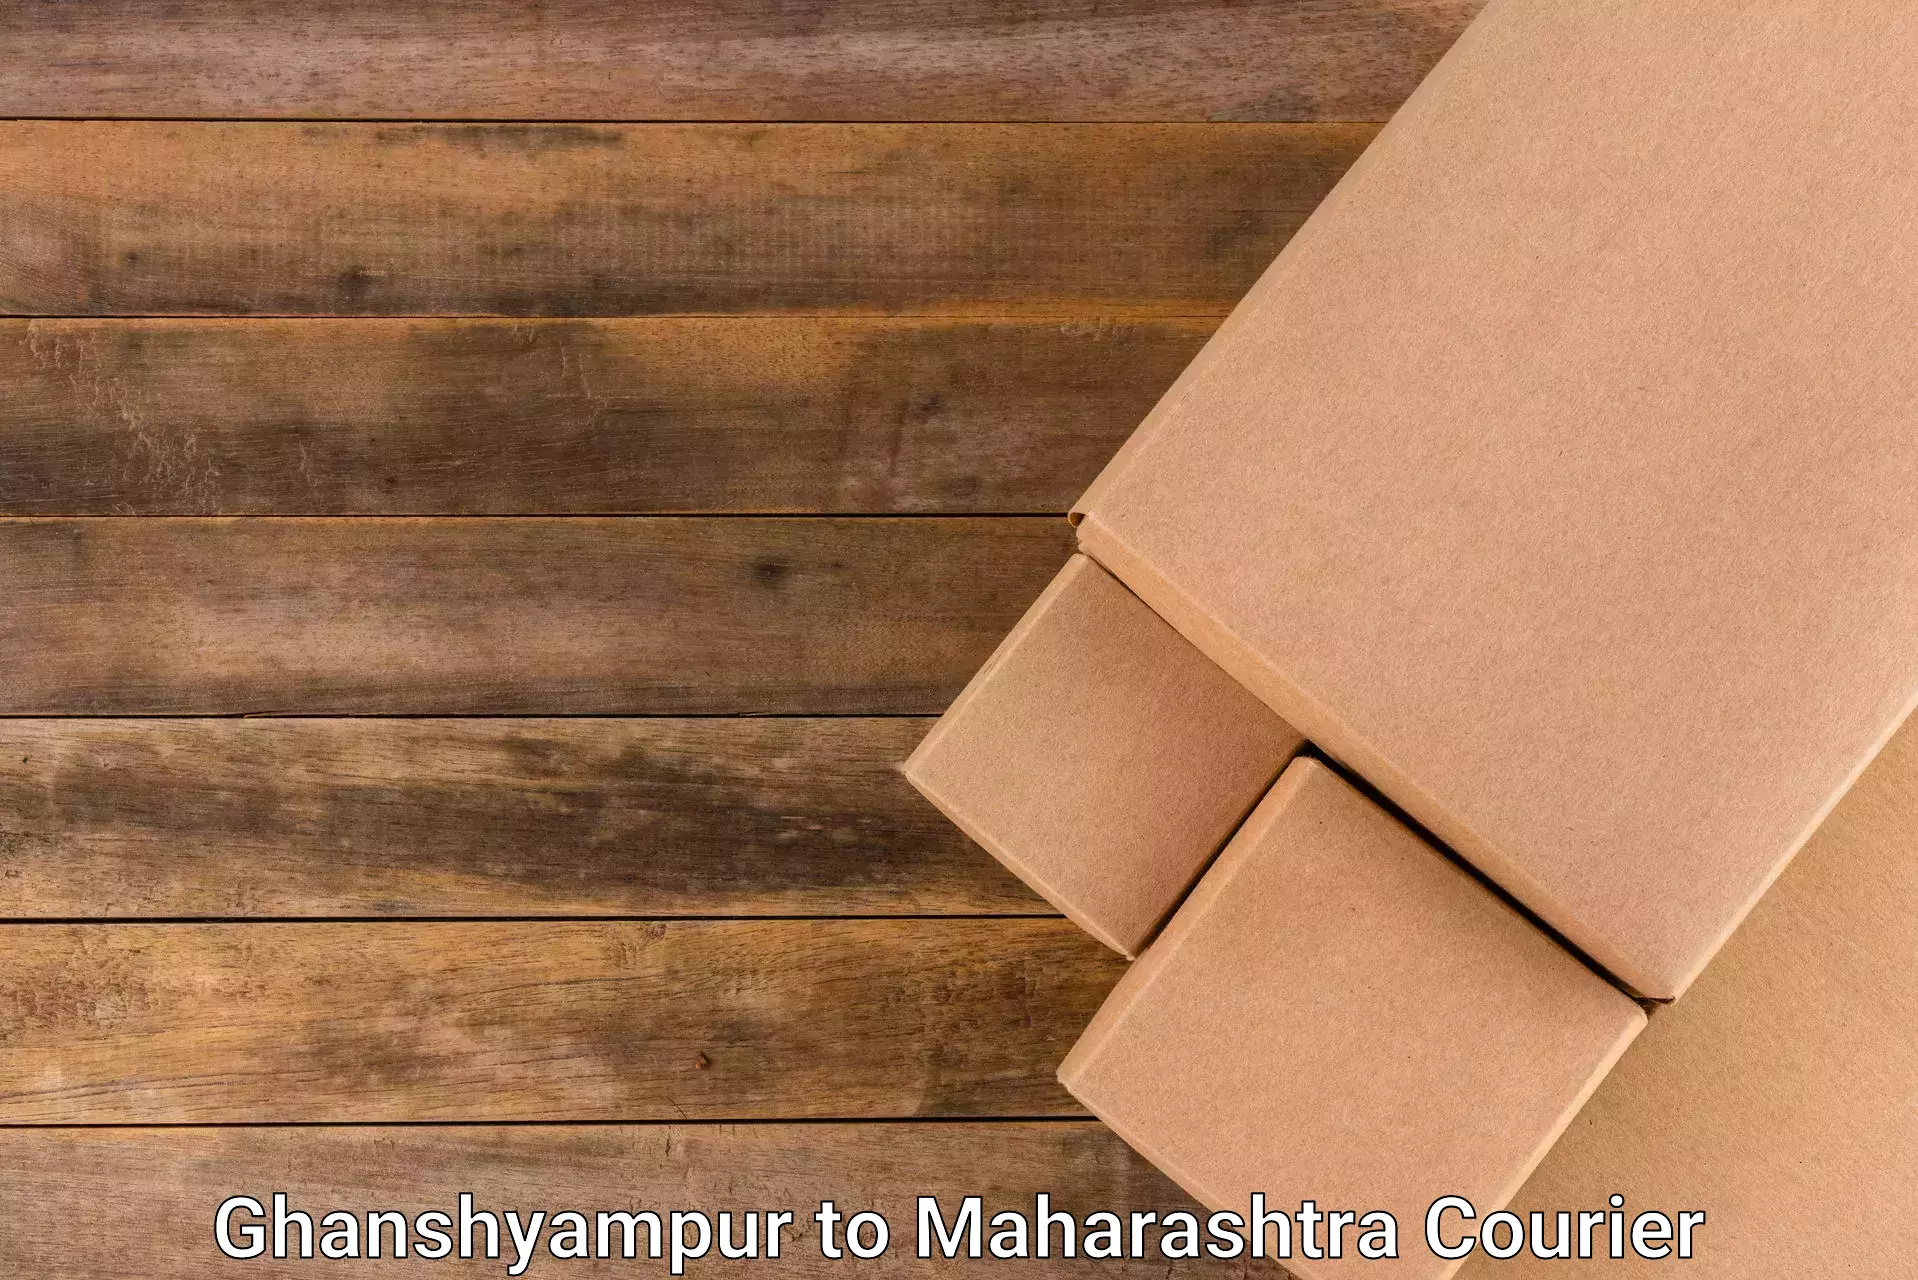 User-friendly delivery service Ghanshyampur to Maharashtra